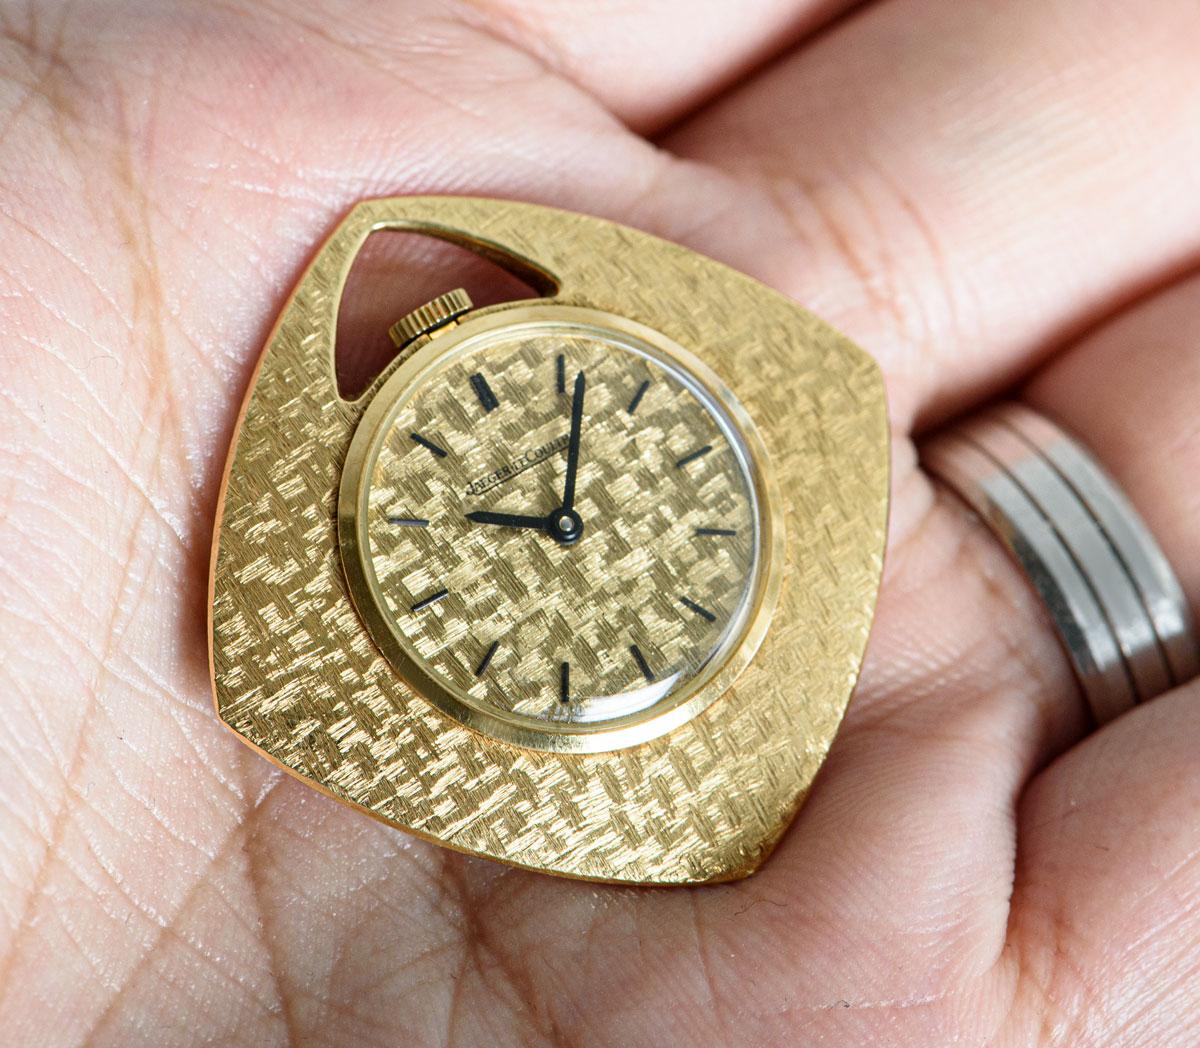 A 40 mm 18k Yellow Gold Open Face Pendant Vintage Gents Pocket Watch, champagne textured dial with applied hour markers, a fixed 18k yellow gold textured bezel, an 18k yellow gold textured case, plastic glass, manual wind movement, in excellent